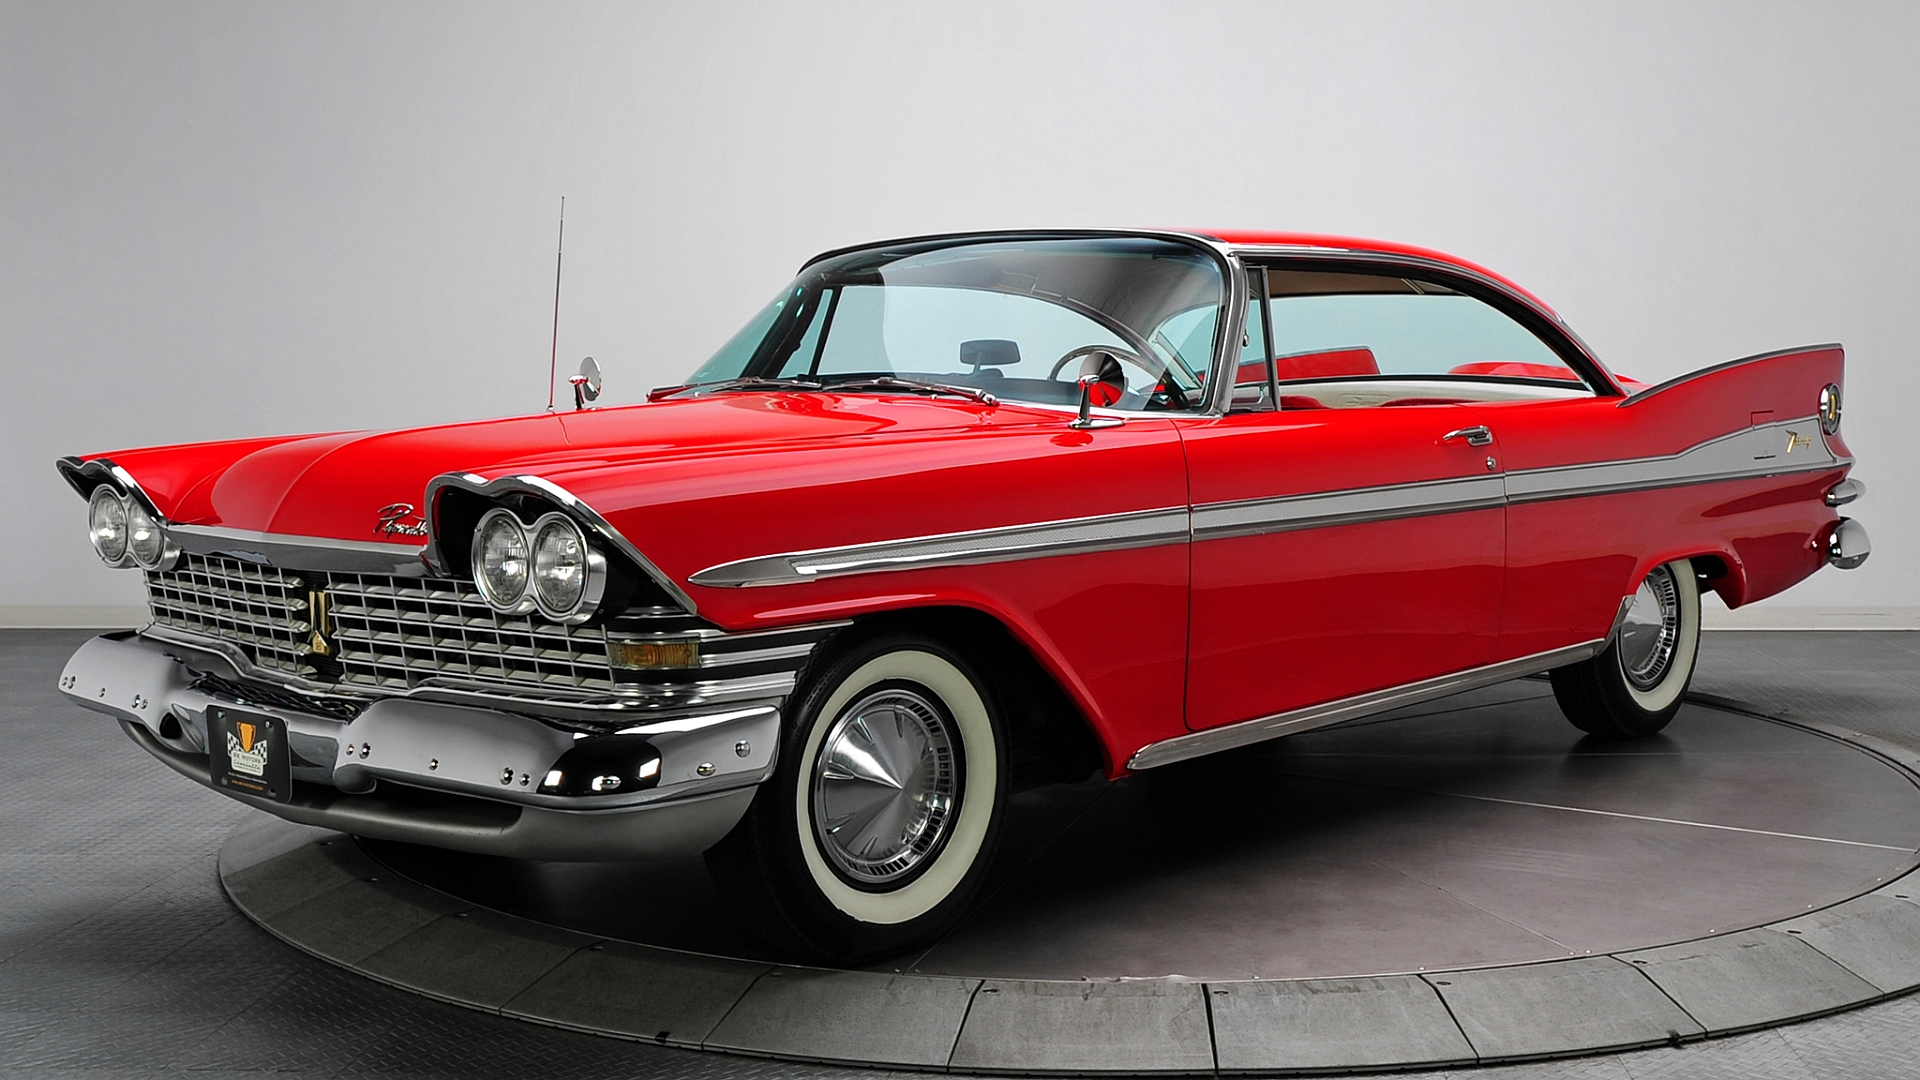 HQ 1961 Plymouth Fury Coupe Wallpapers | File 1221.44Kb